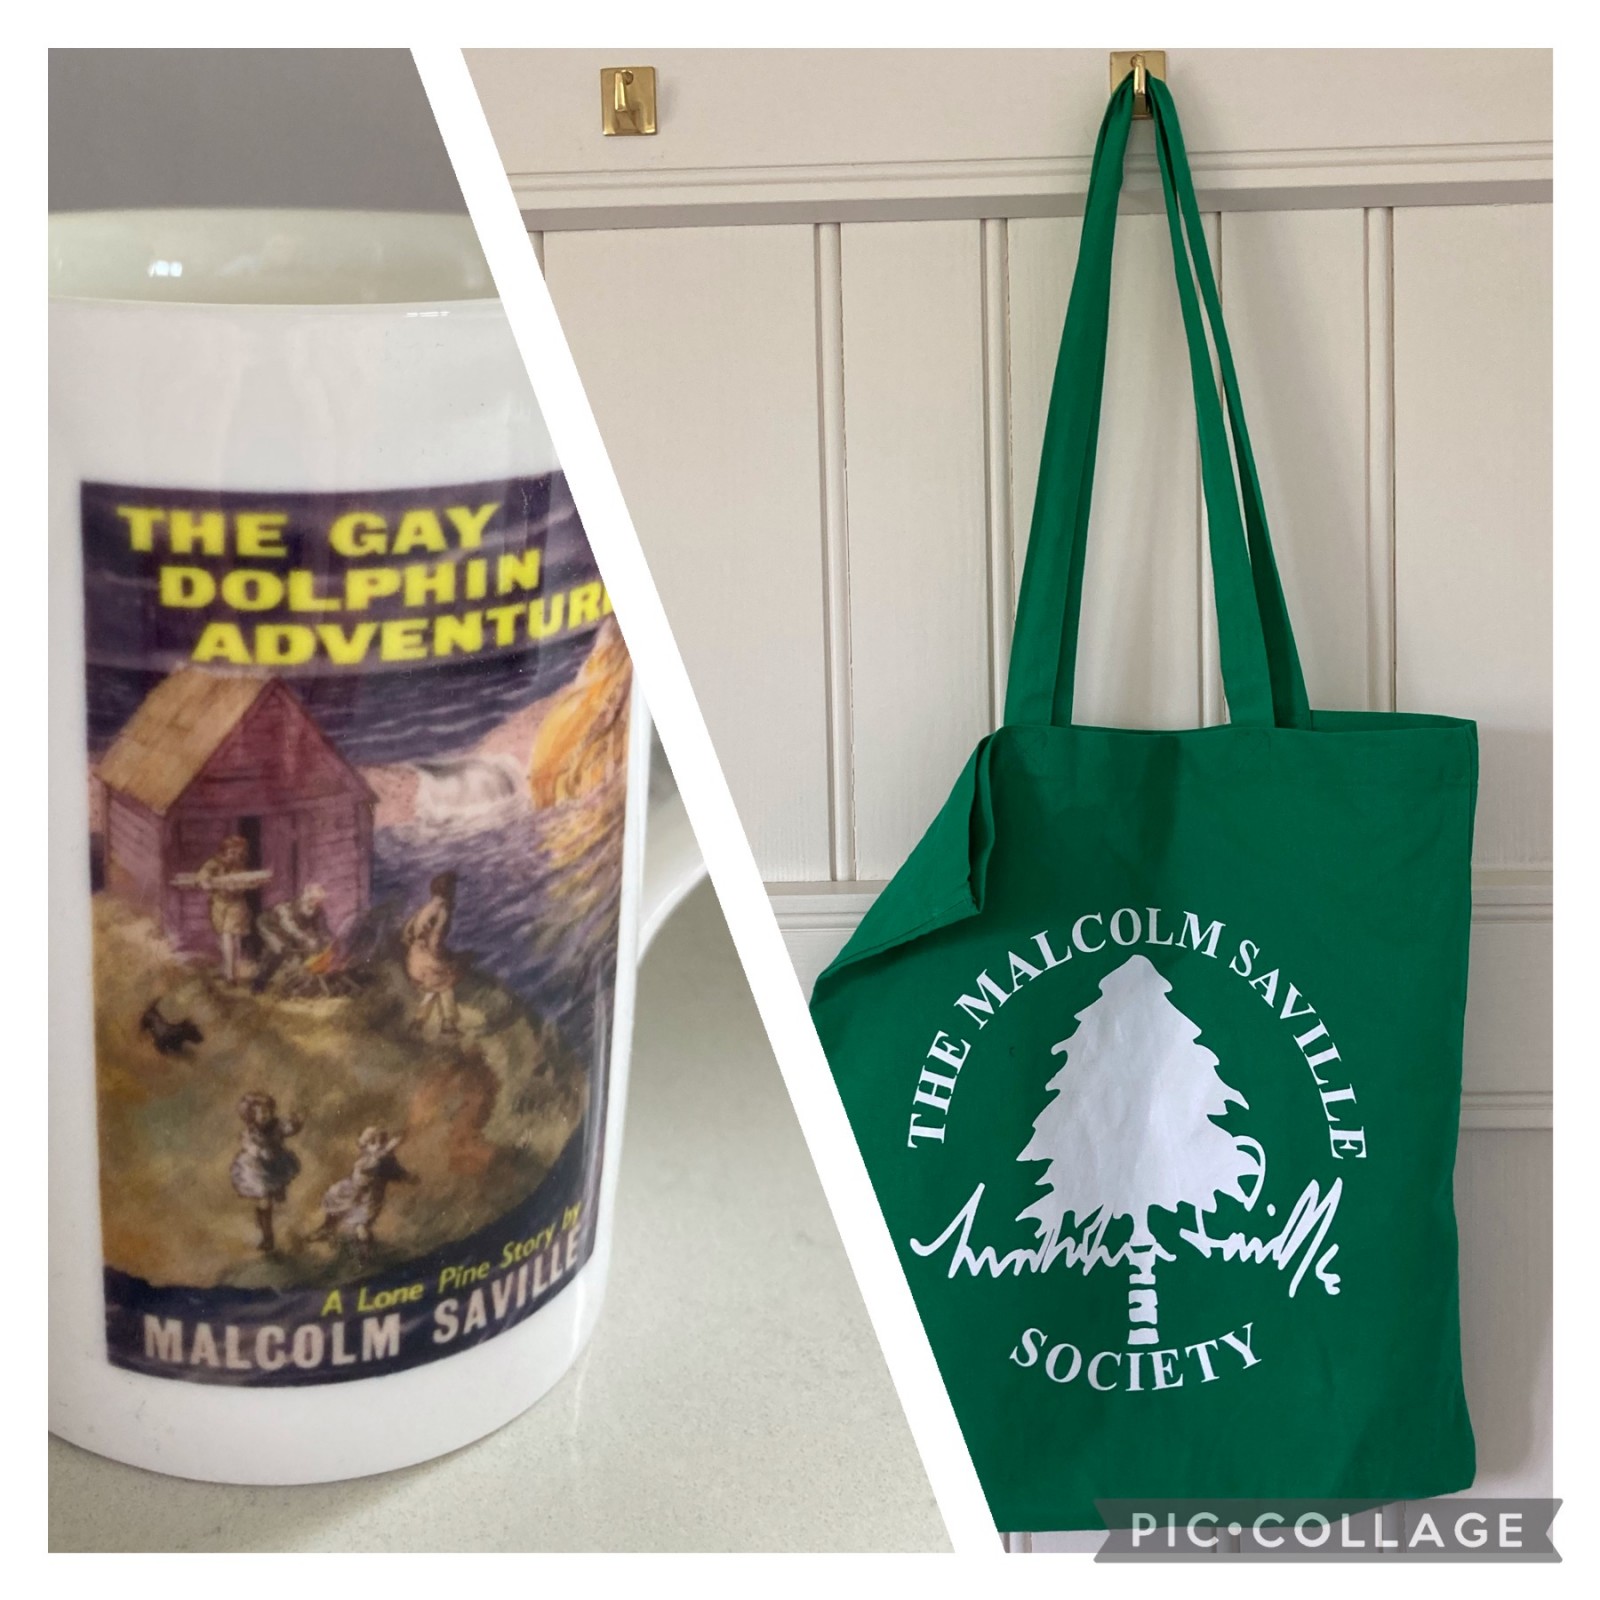 New merchandise in our Members' shop!